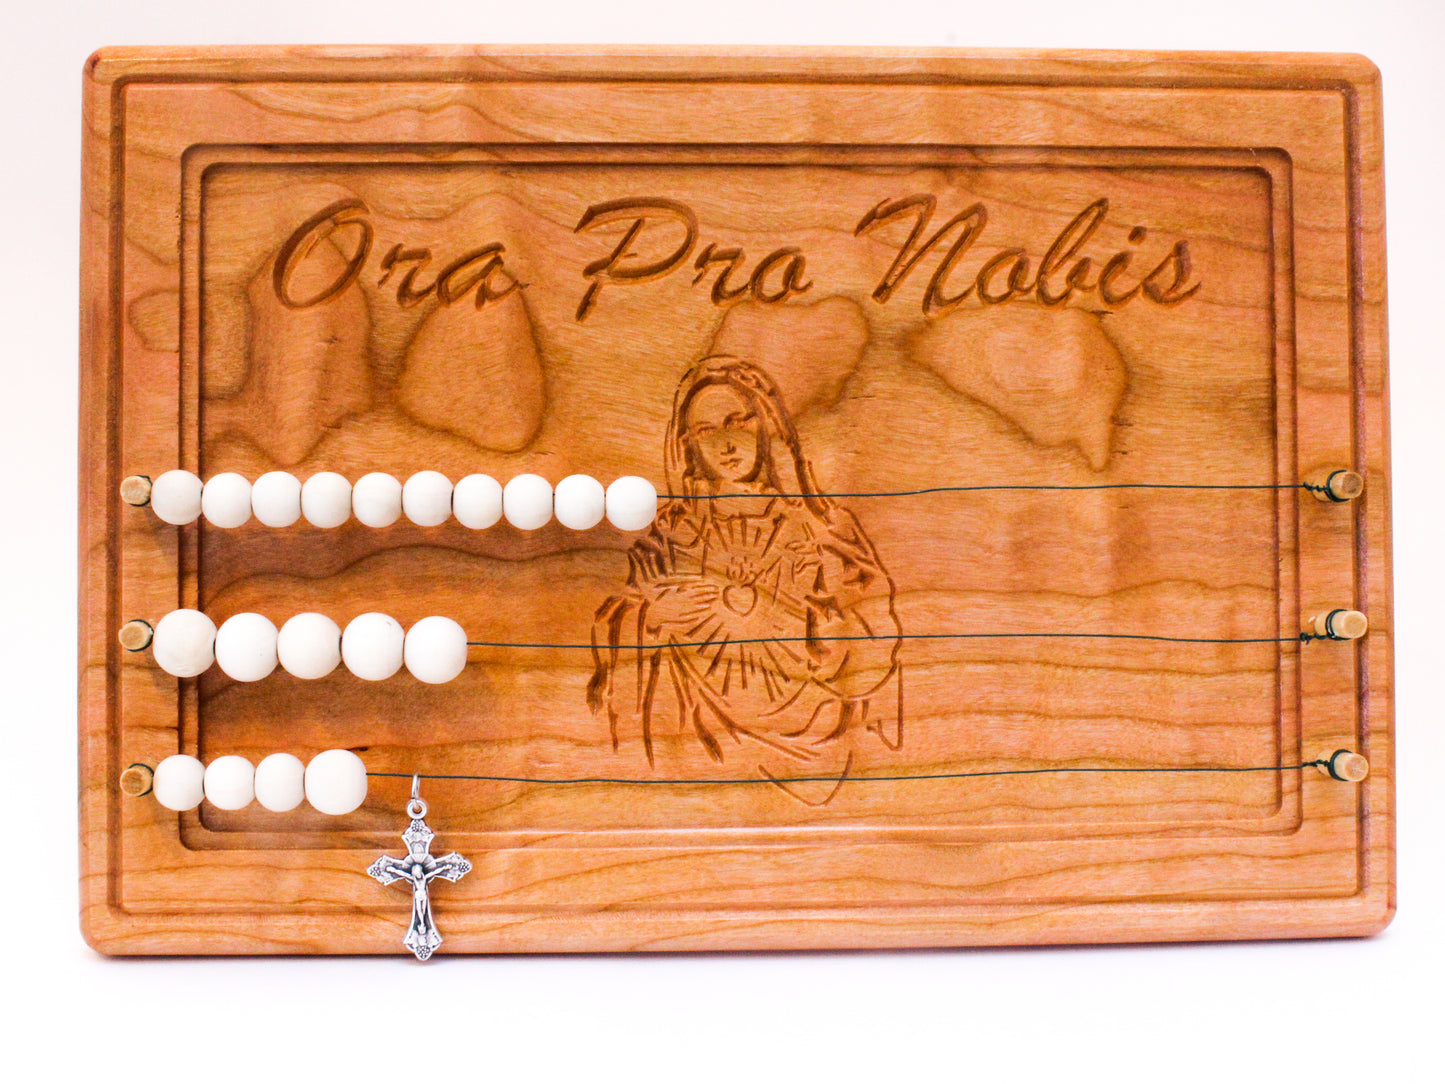 Handmade wooden kitchen rosary engraved with an image of The Blessed Virgin Mary and featuring the text Ora Pro Nobis, which is Latin for Pray for Us.